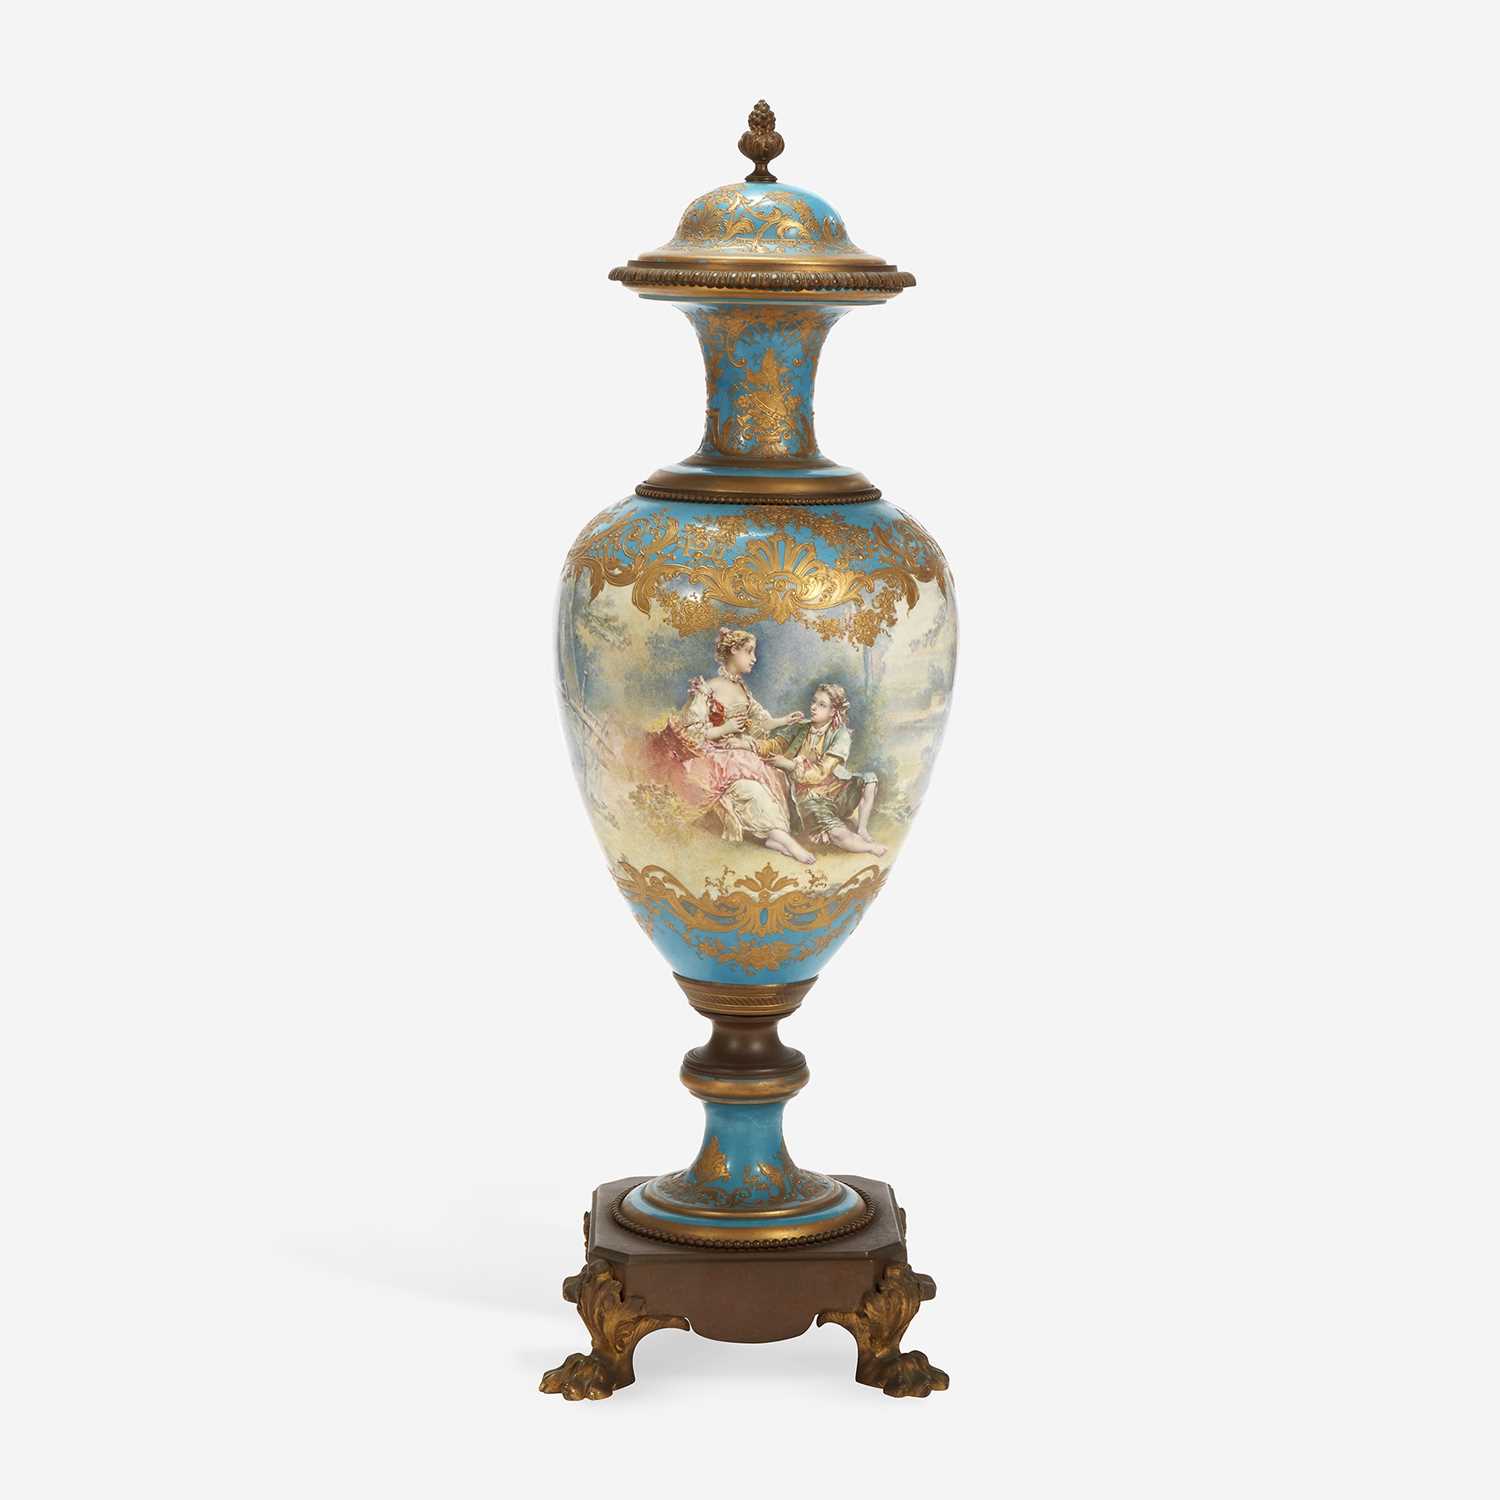 Lot 52 - A Sèvres Style Porcelain Gilt-Bronze Mounted Hand-Painted Covered Vase